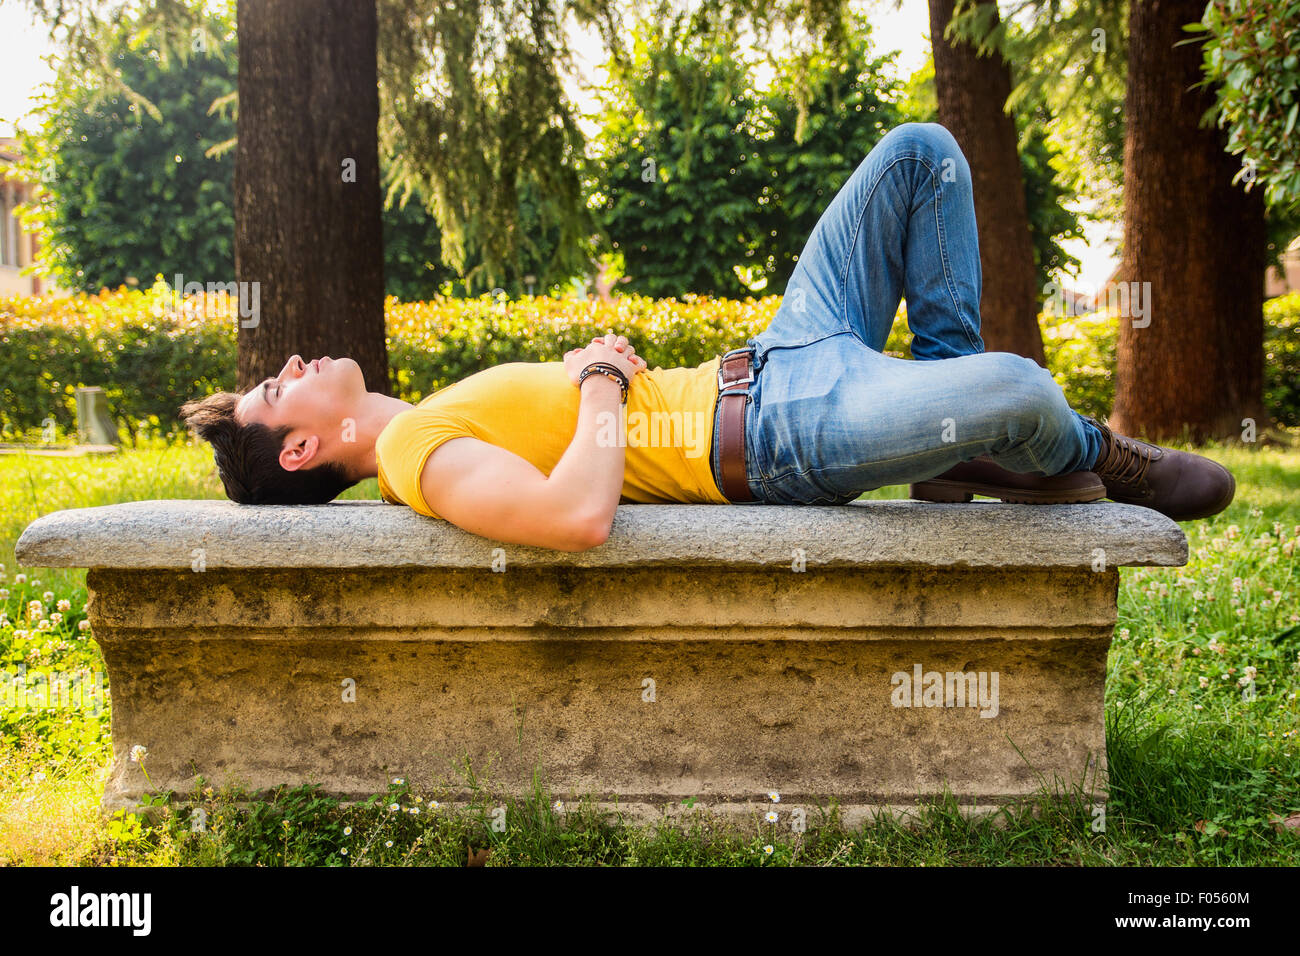 Attractive young man sleeping on stone bench outdoor in city park during day, full body shot Stock Photo